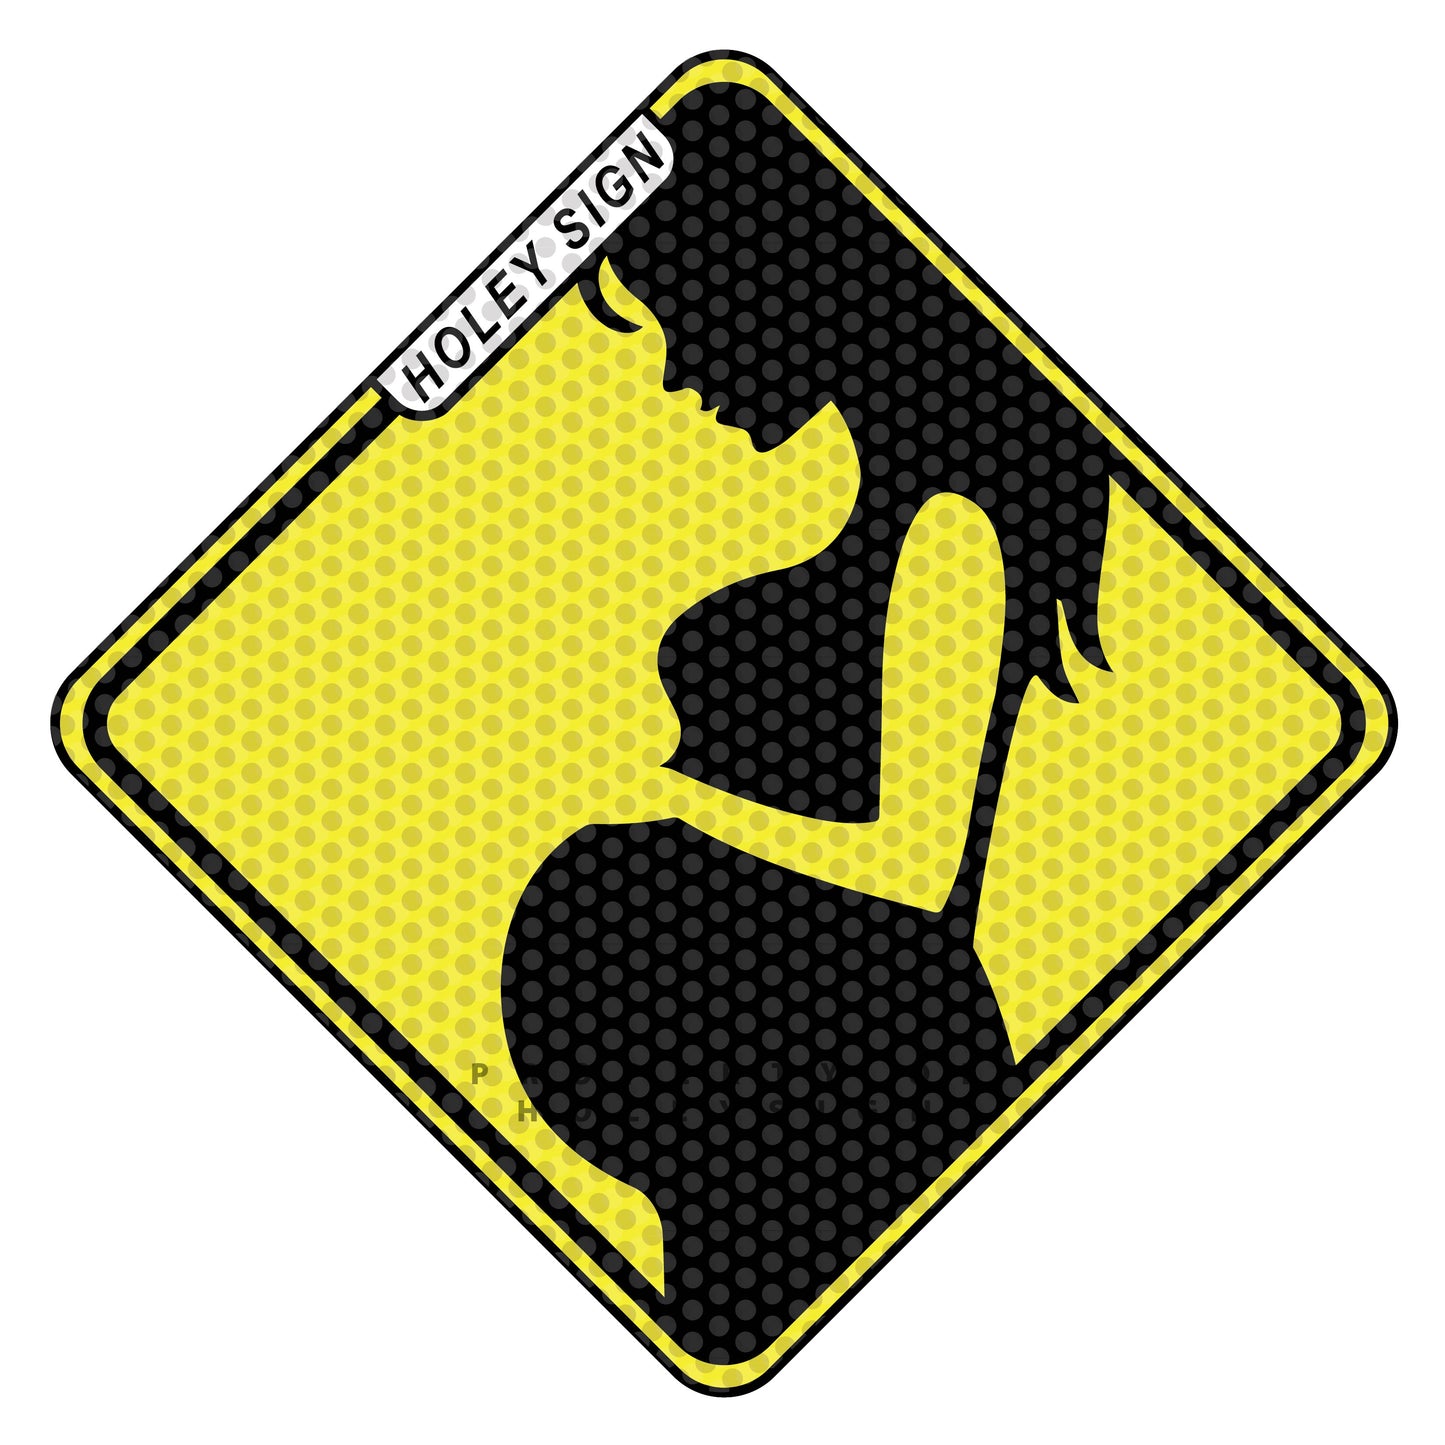 Pregnant Woman Silhouette on Board Decal